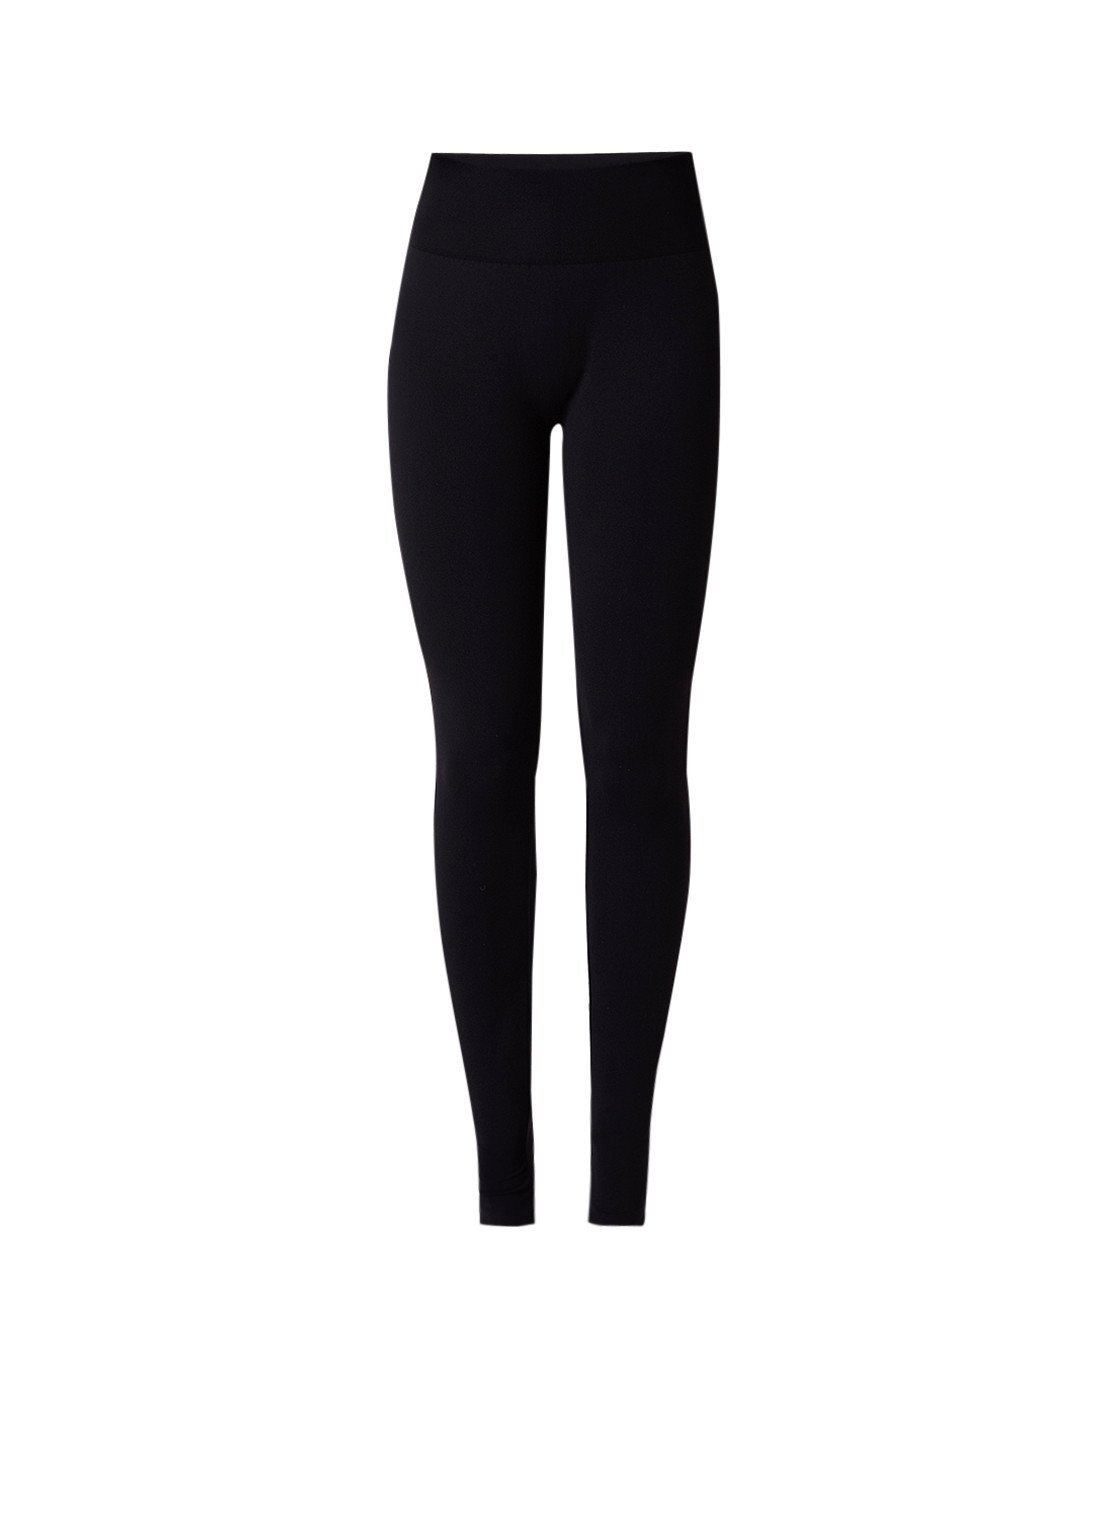 Wolford Perfect fit legging van jersey